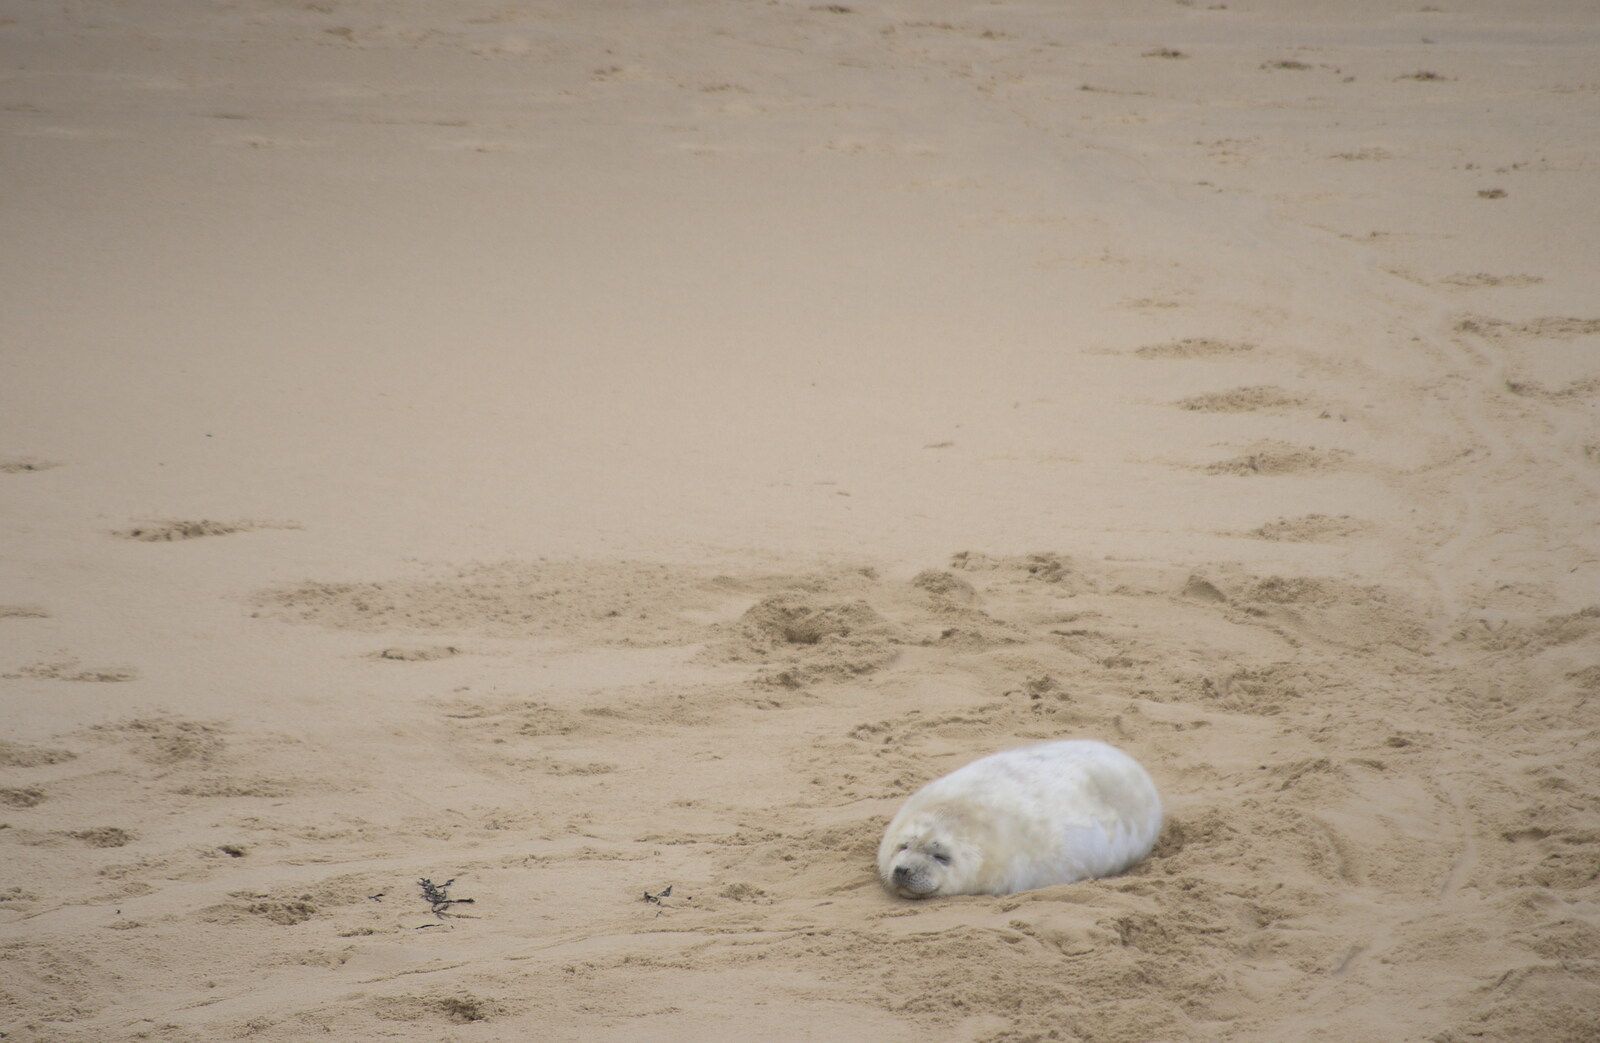 A seal pup lolls on the beach from Horsey Seals and Sea Palling, Norfolk Coast - 2nd January 2017